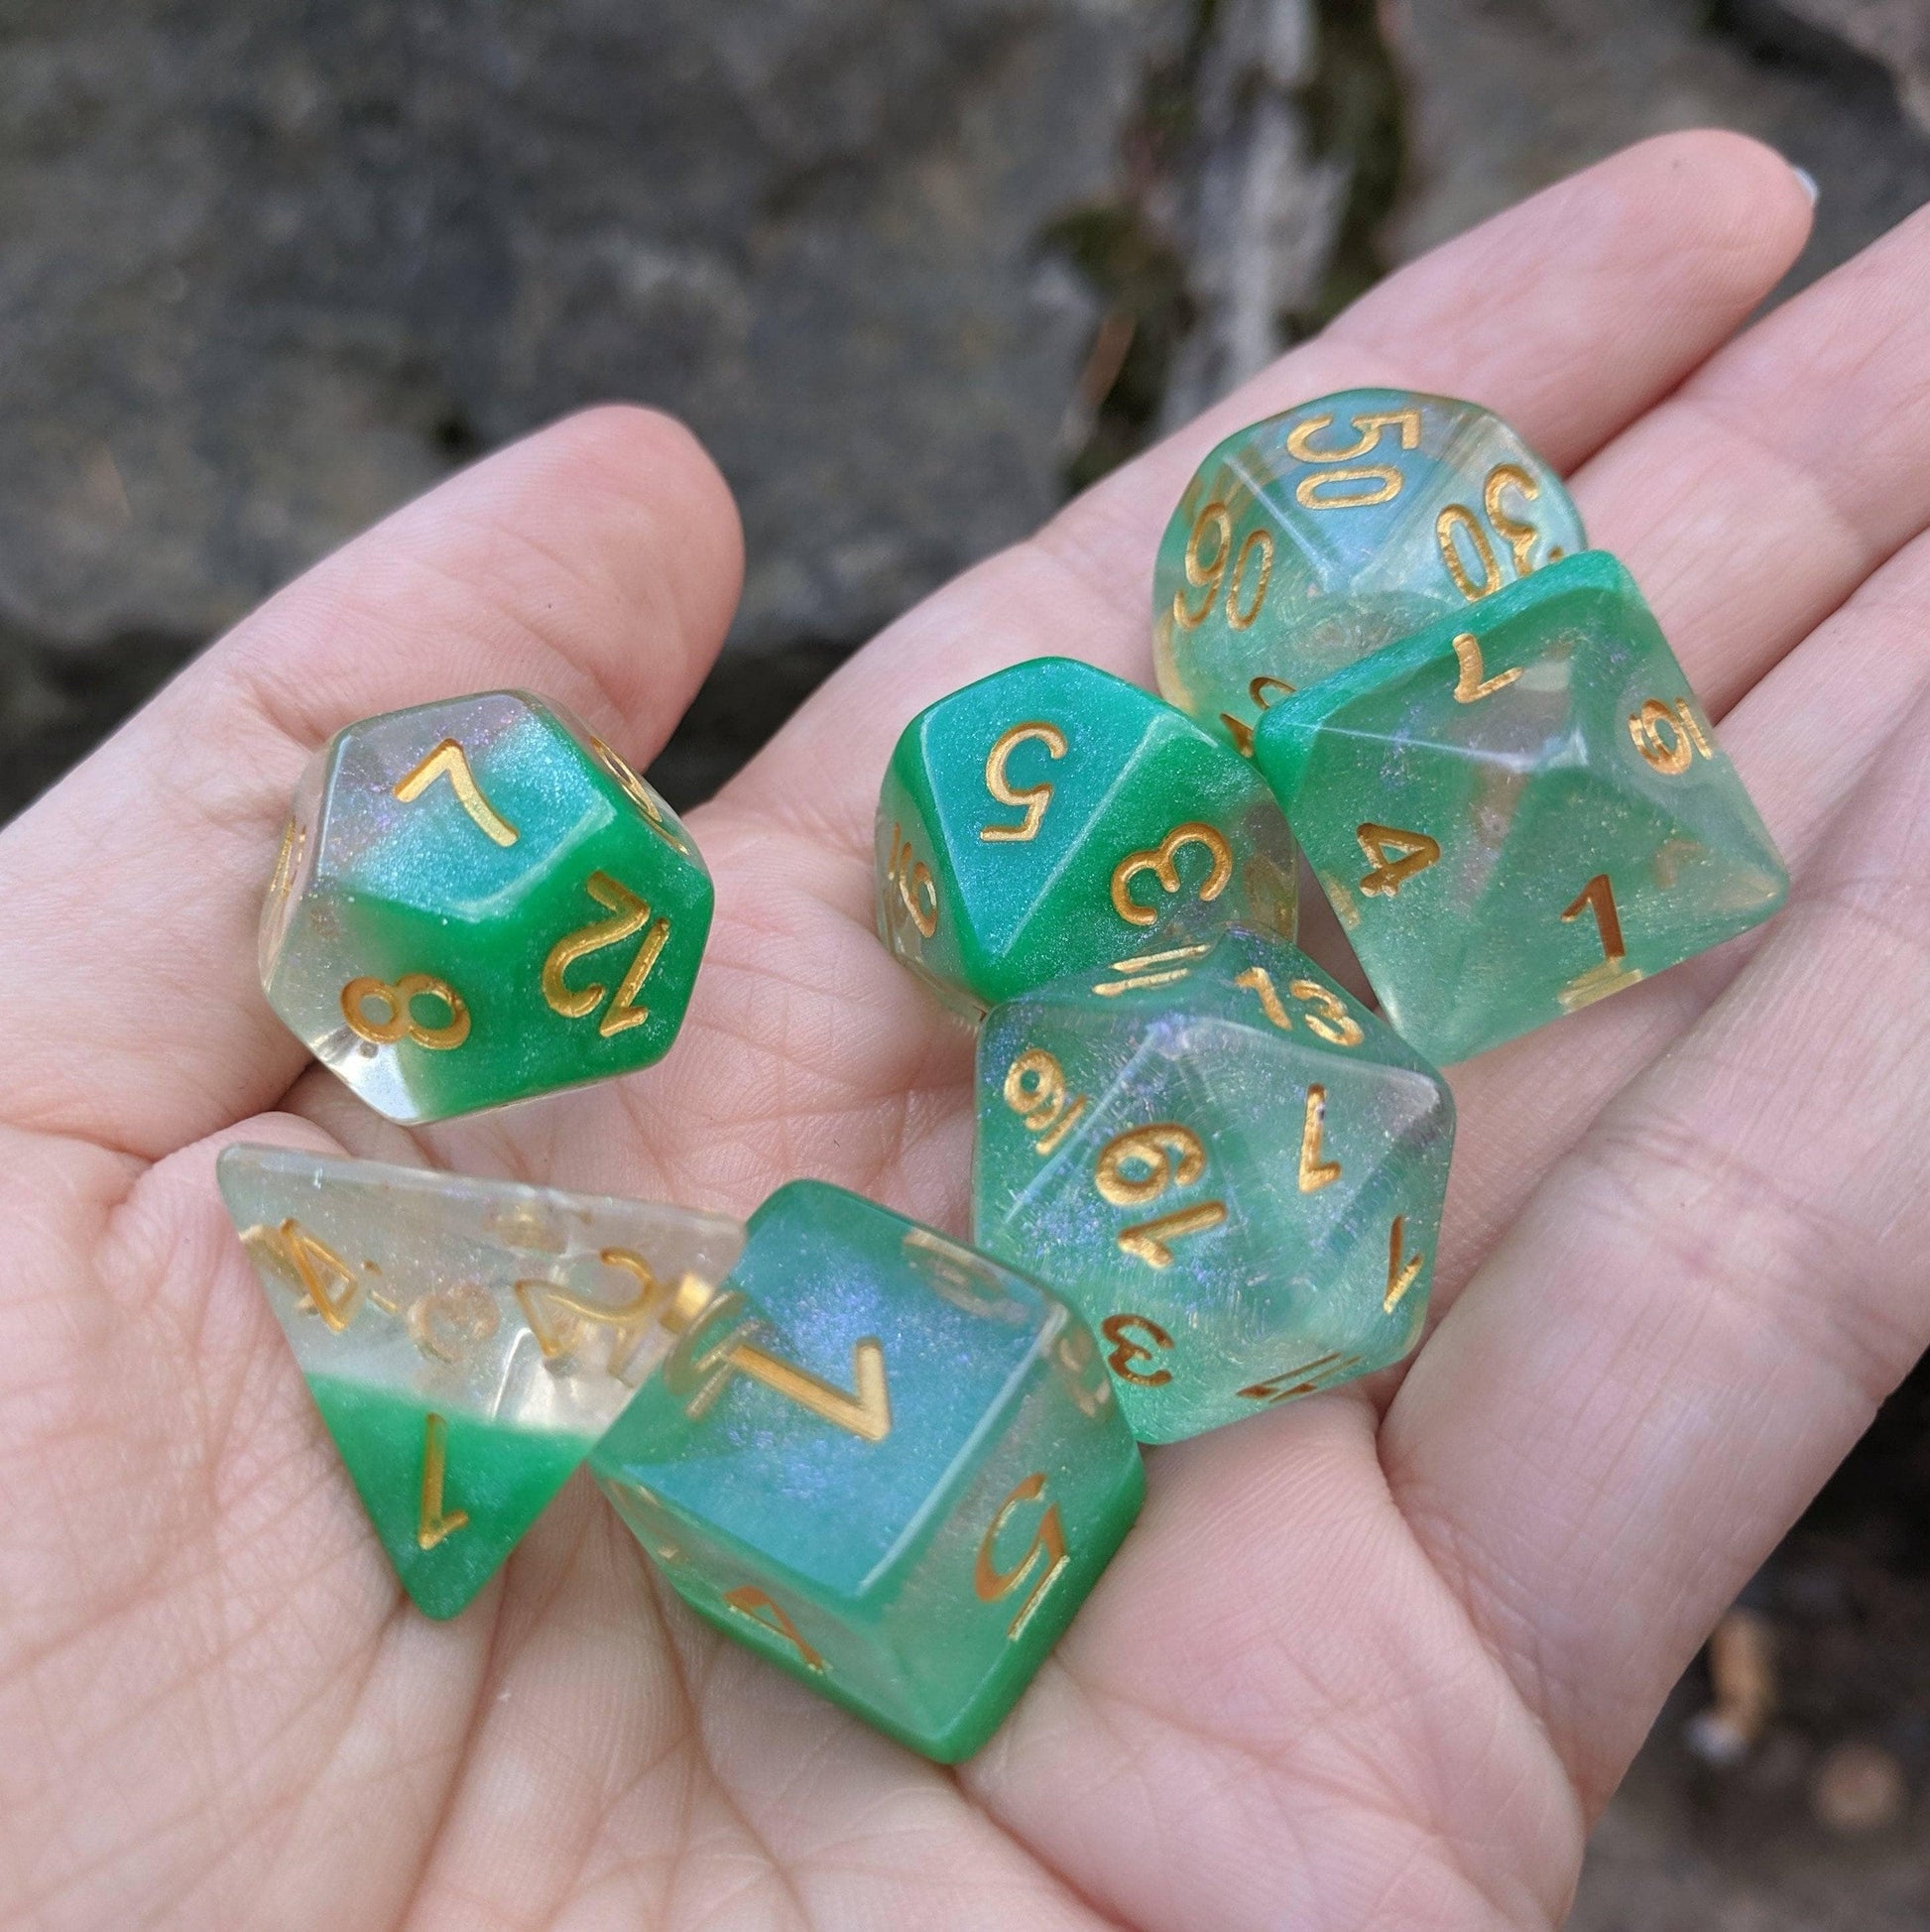 Spring Dew DnD Dice Set, Shimmering Translucent Glitter Dice with a Green Bottom Layer - CozyGamer